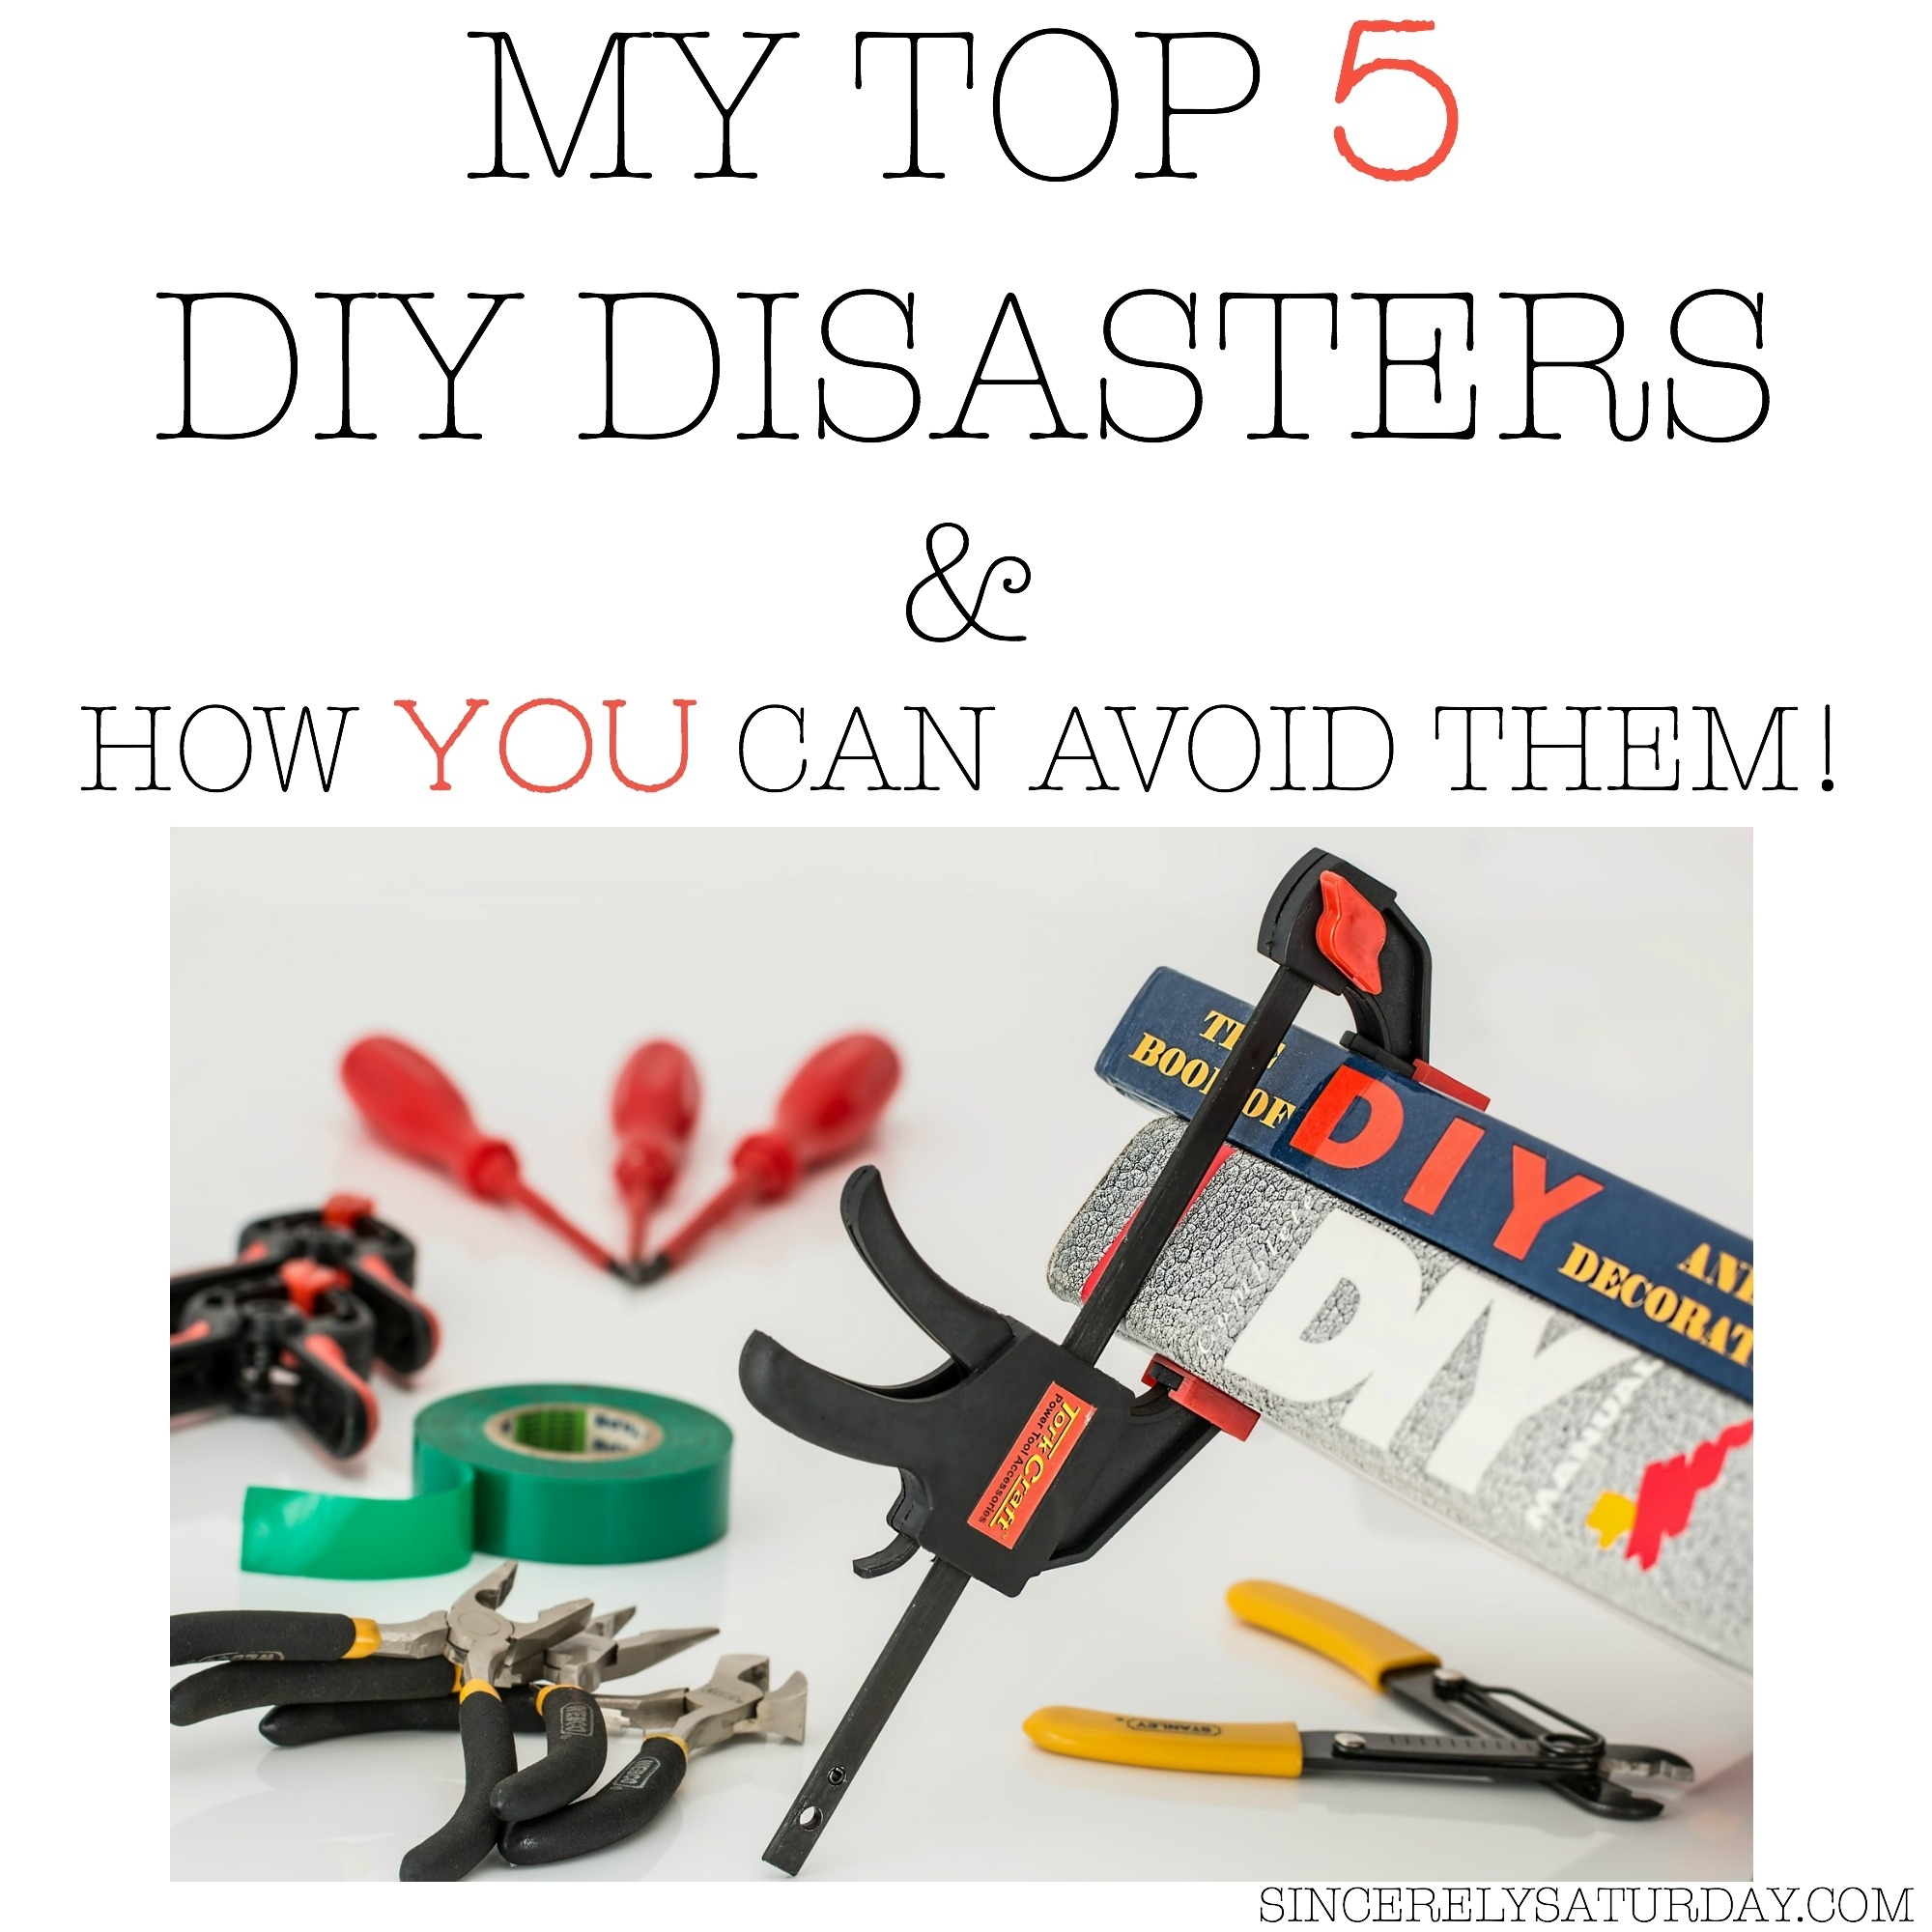 My top 5 DIY disasters and how you can avoid them